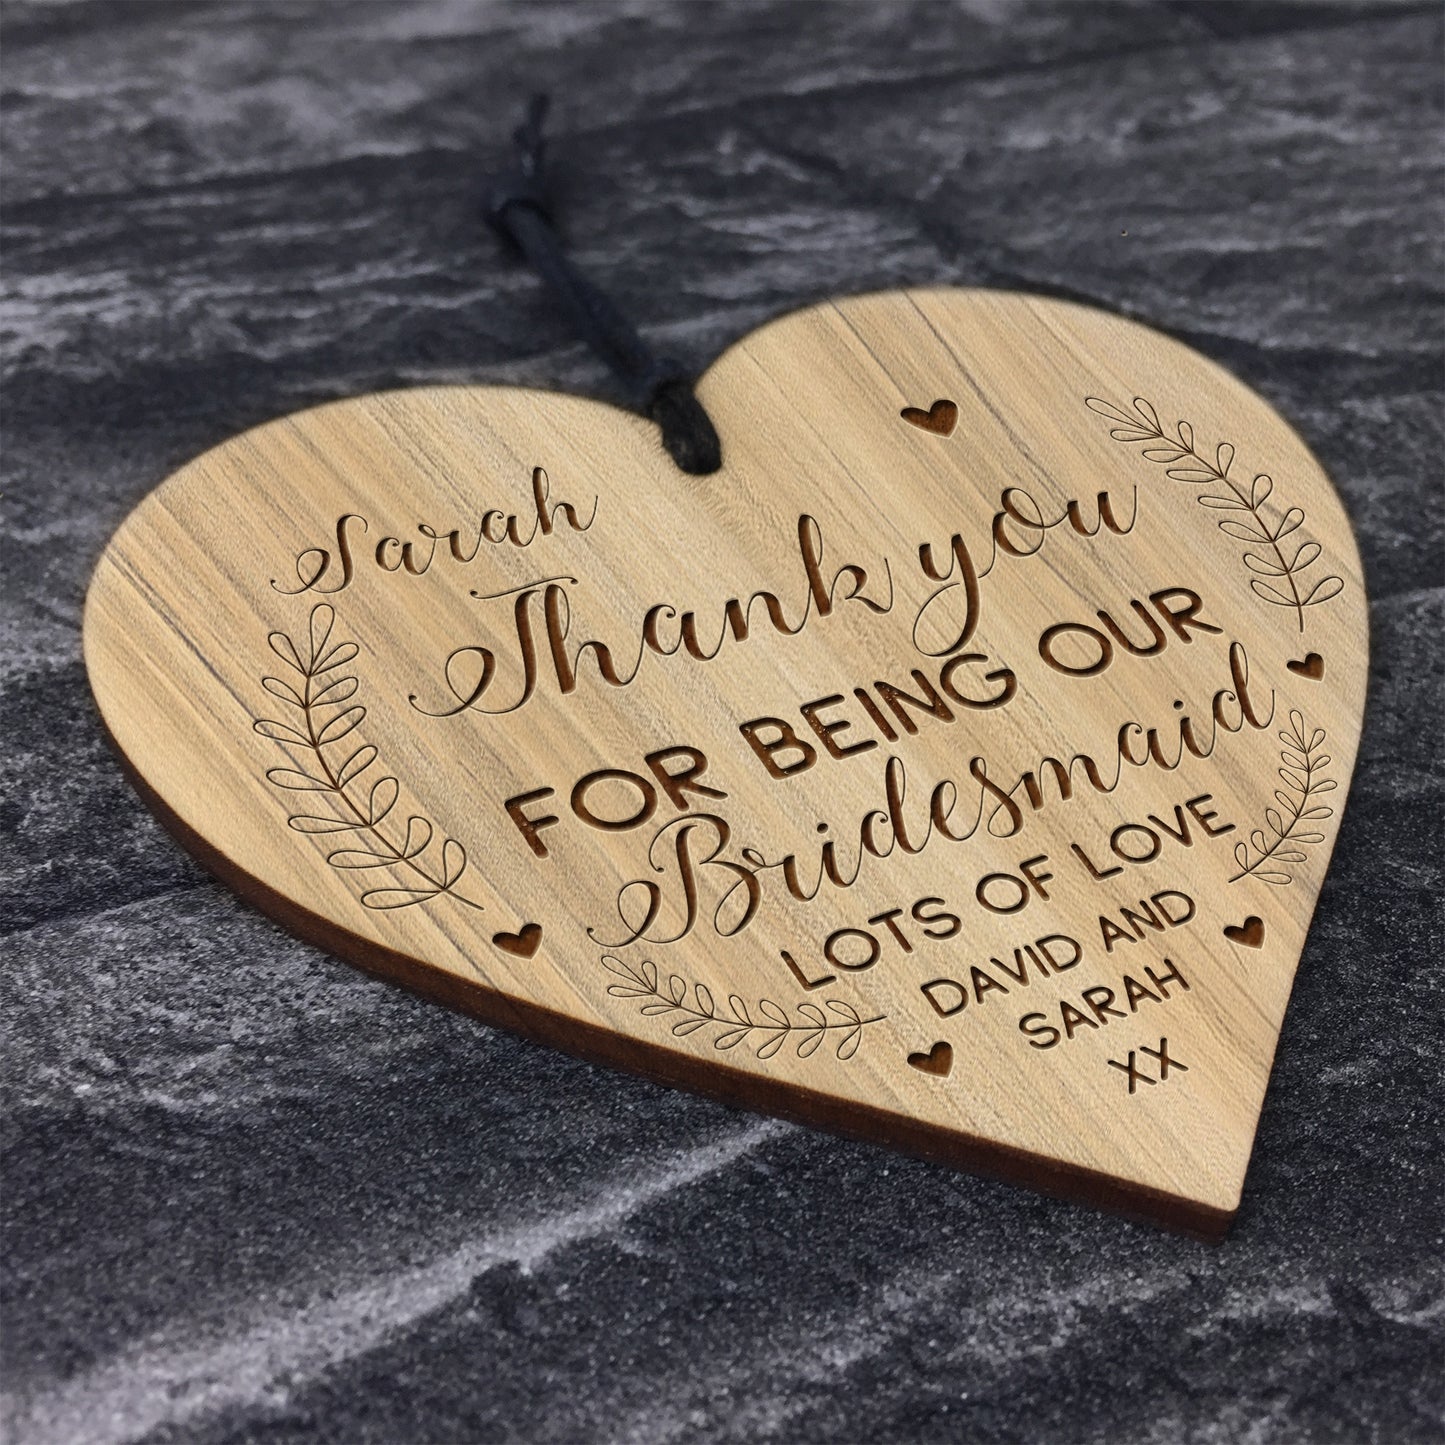 Personalised Bridesmaid Gifts Engraved Heart Thank You Gifts